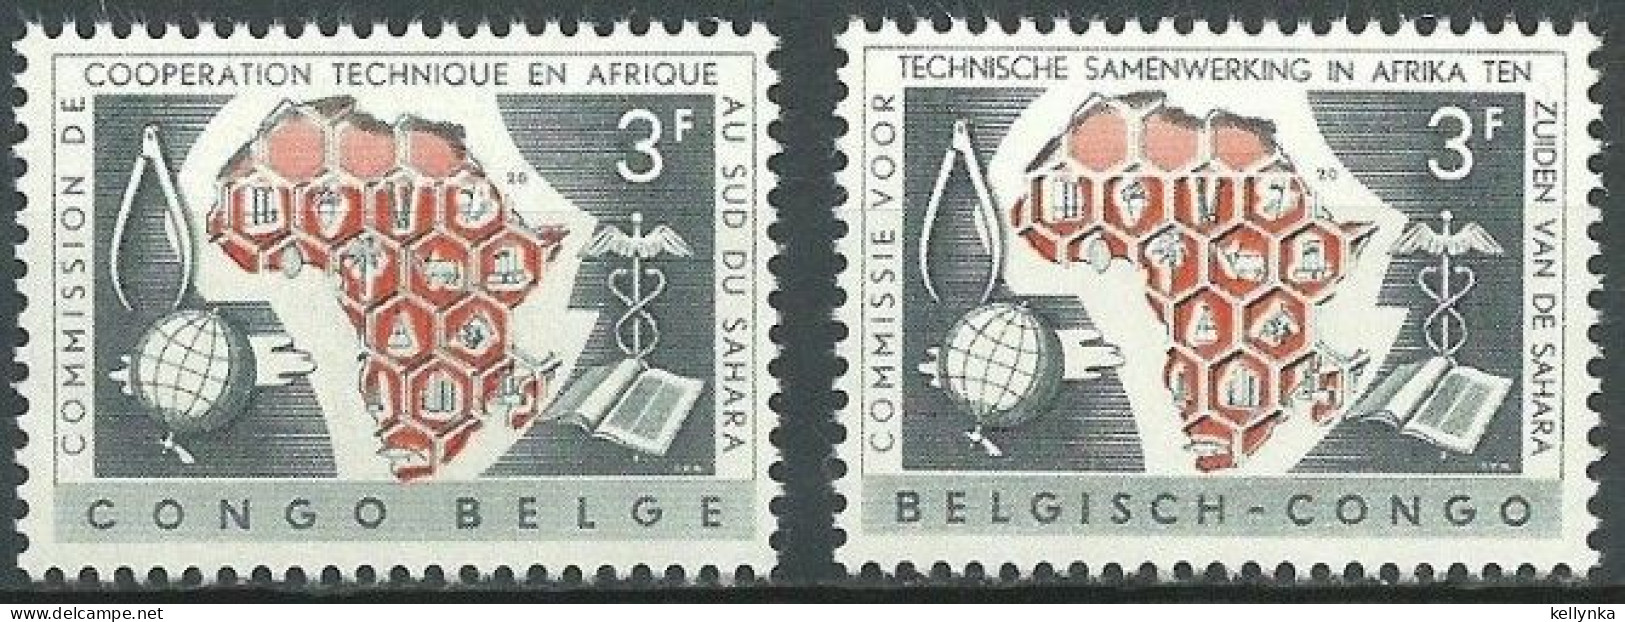 Congo Belge - 365/366 - Cartes - 1960 - MNH - Unused Stamps